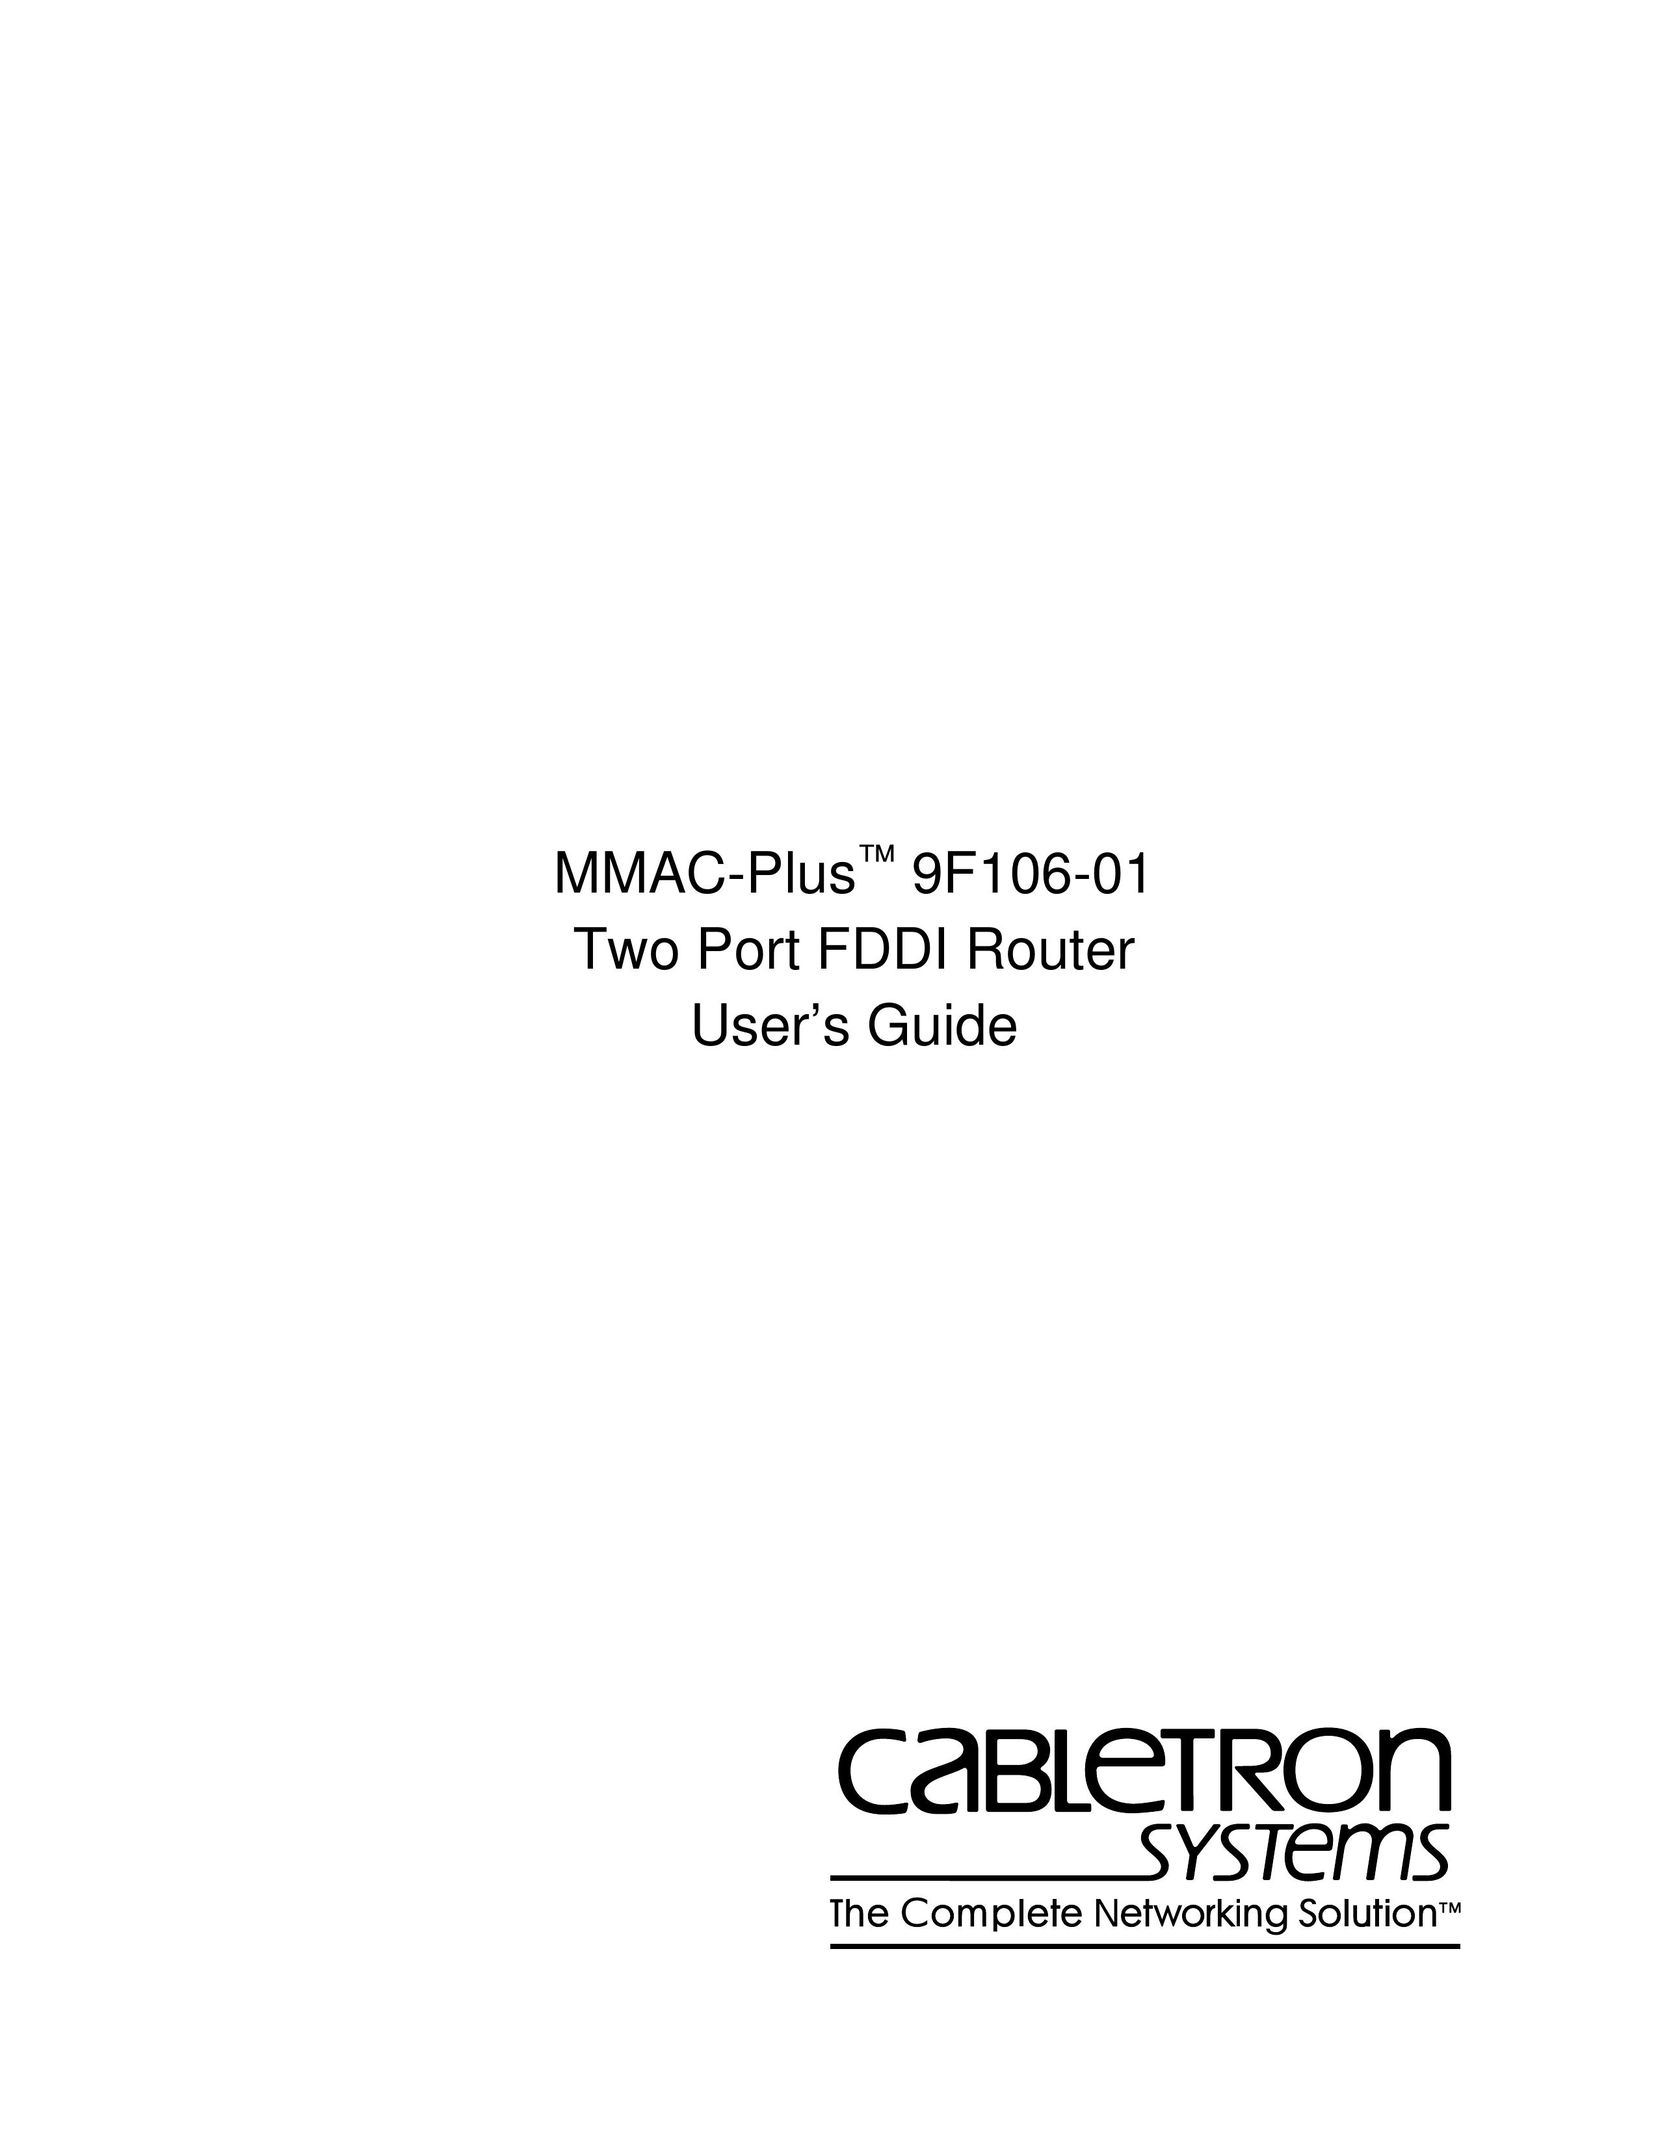 Cabletron Systems 9F106-01 Indoor Fireplace User Manual